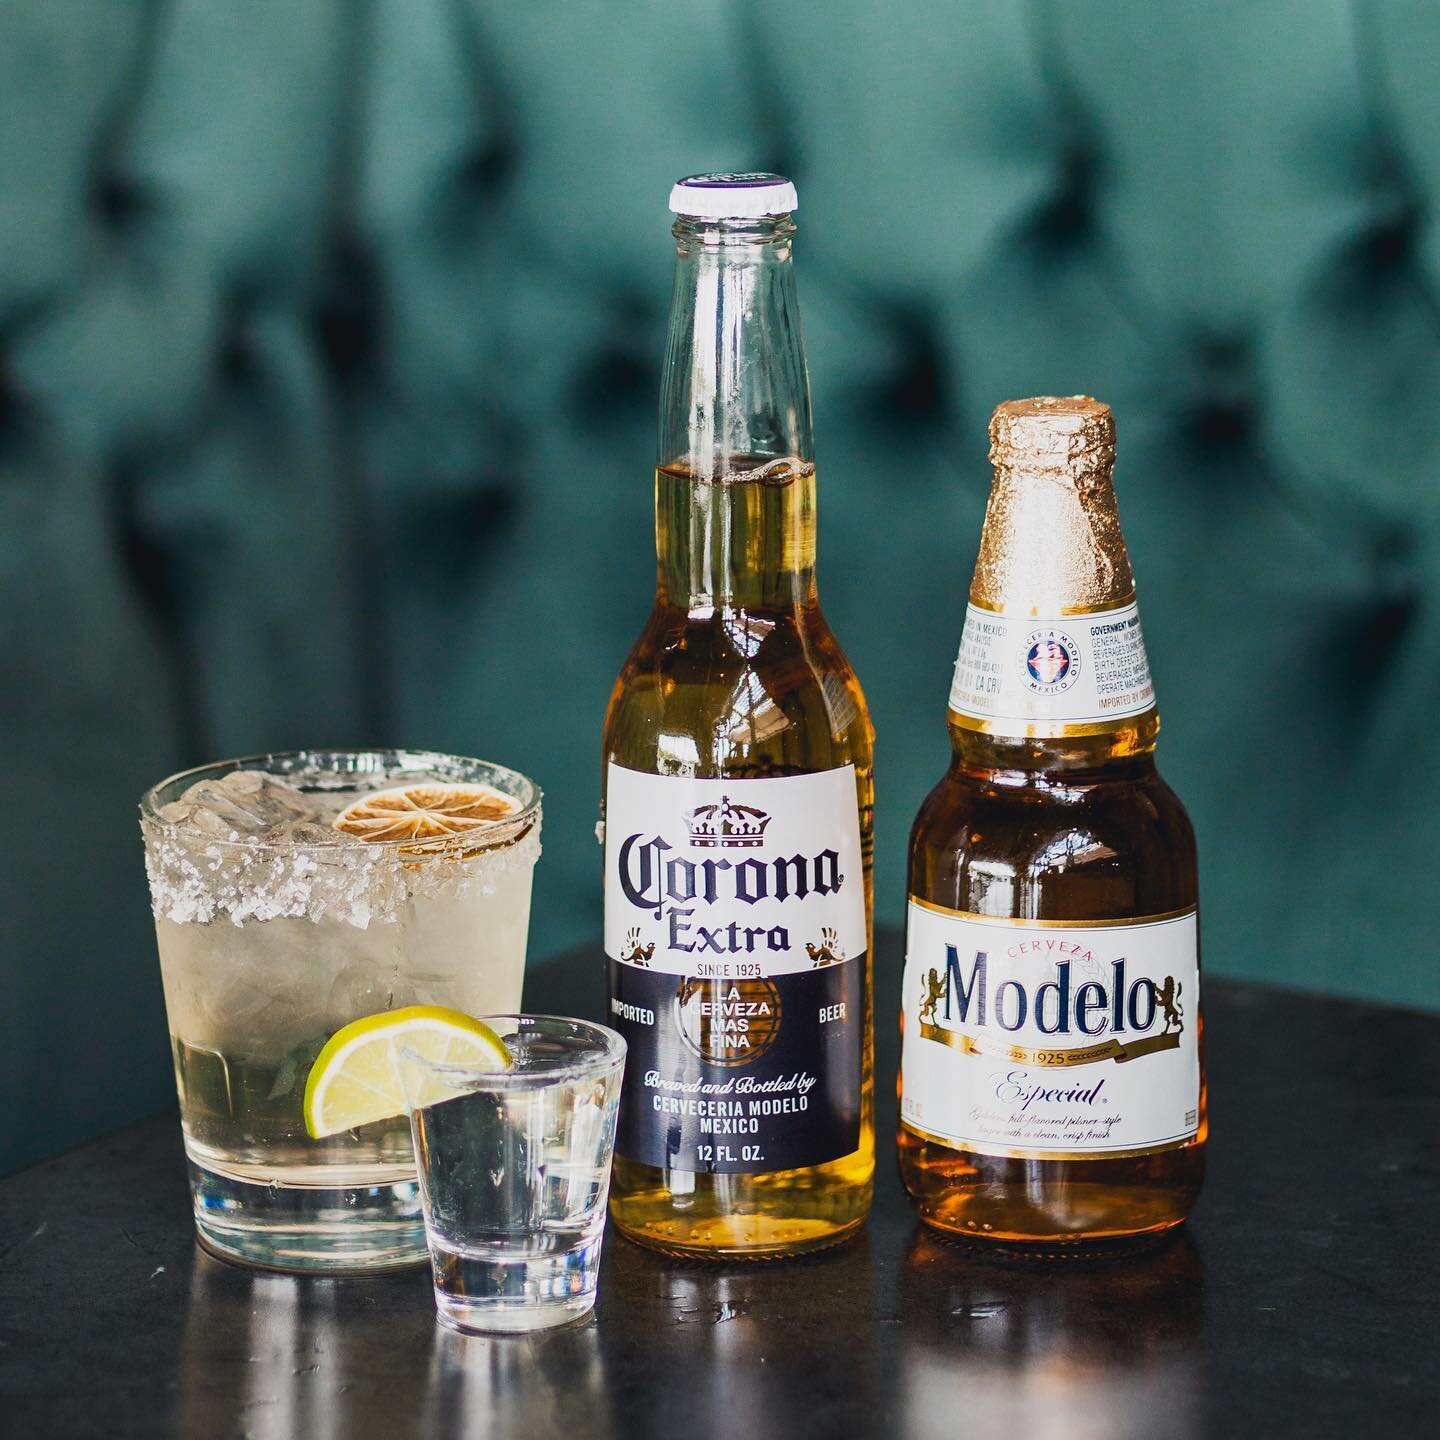 Join us Friday to celebrate Cinco De Mayo! 🇲🇽We&rsquo;ll be pouring $6 Draft Margs (Spicy Available) and $8 for your choice of Modelo or Corona + Well Tequila Shot. Cheers!